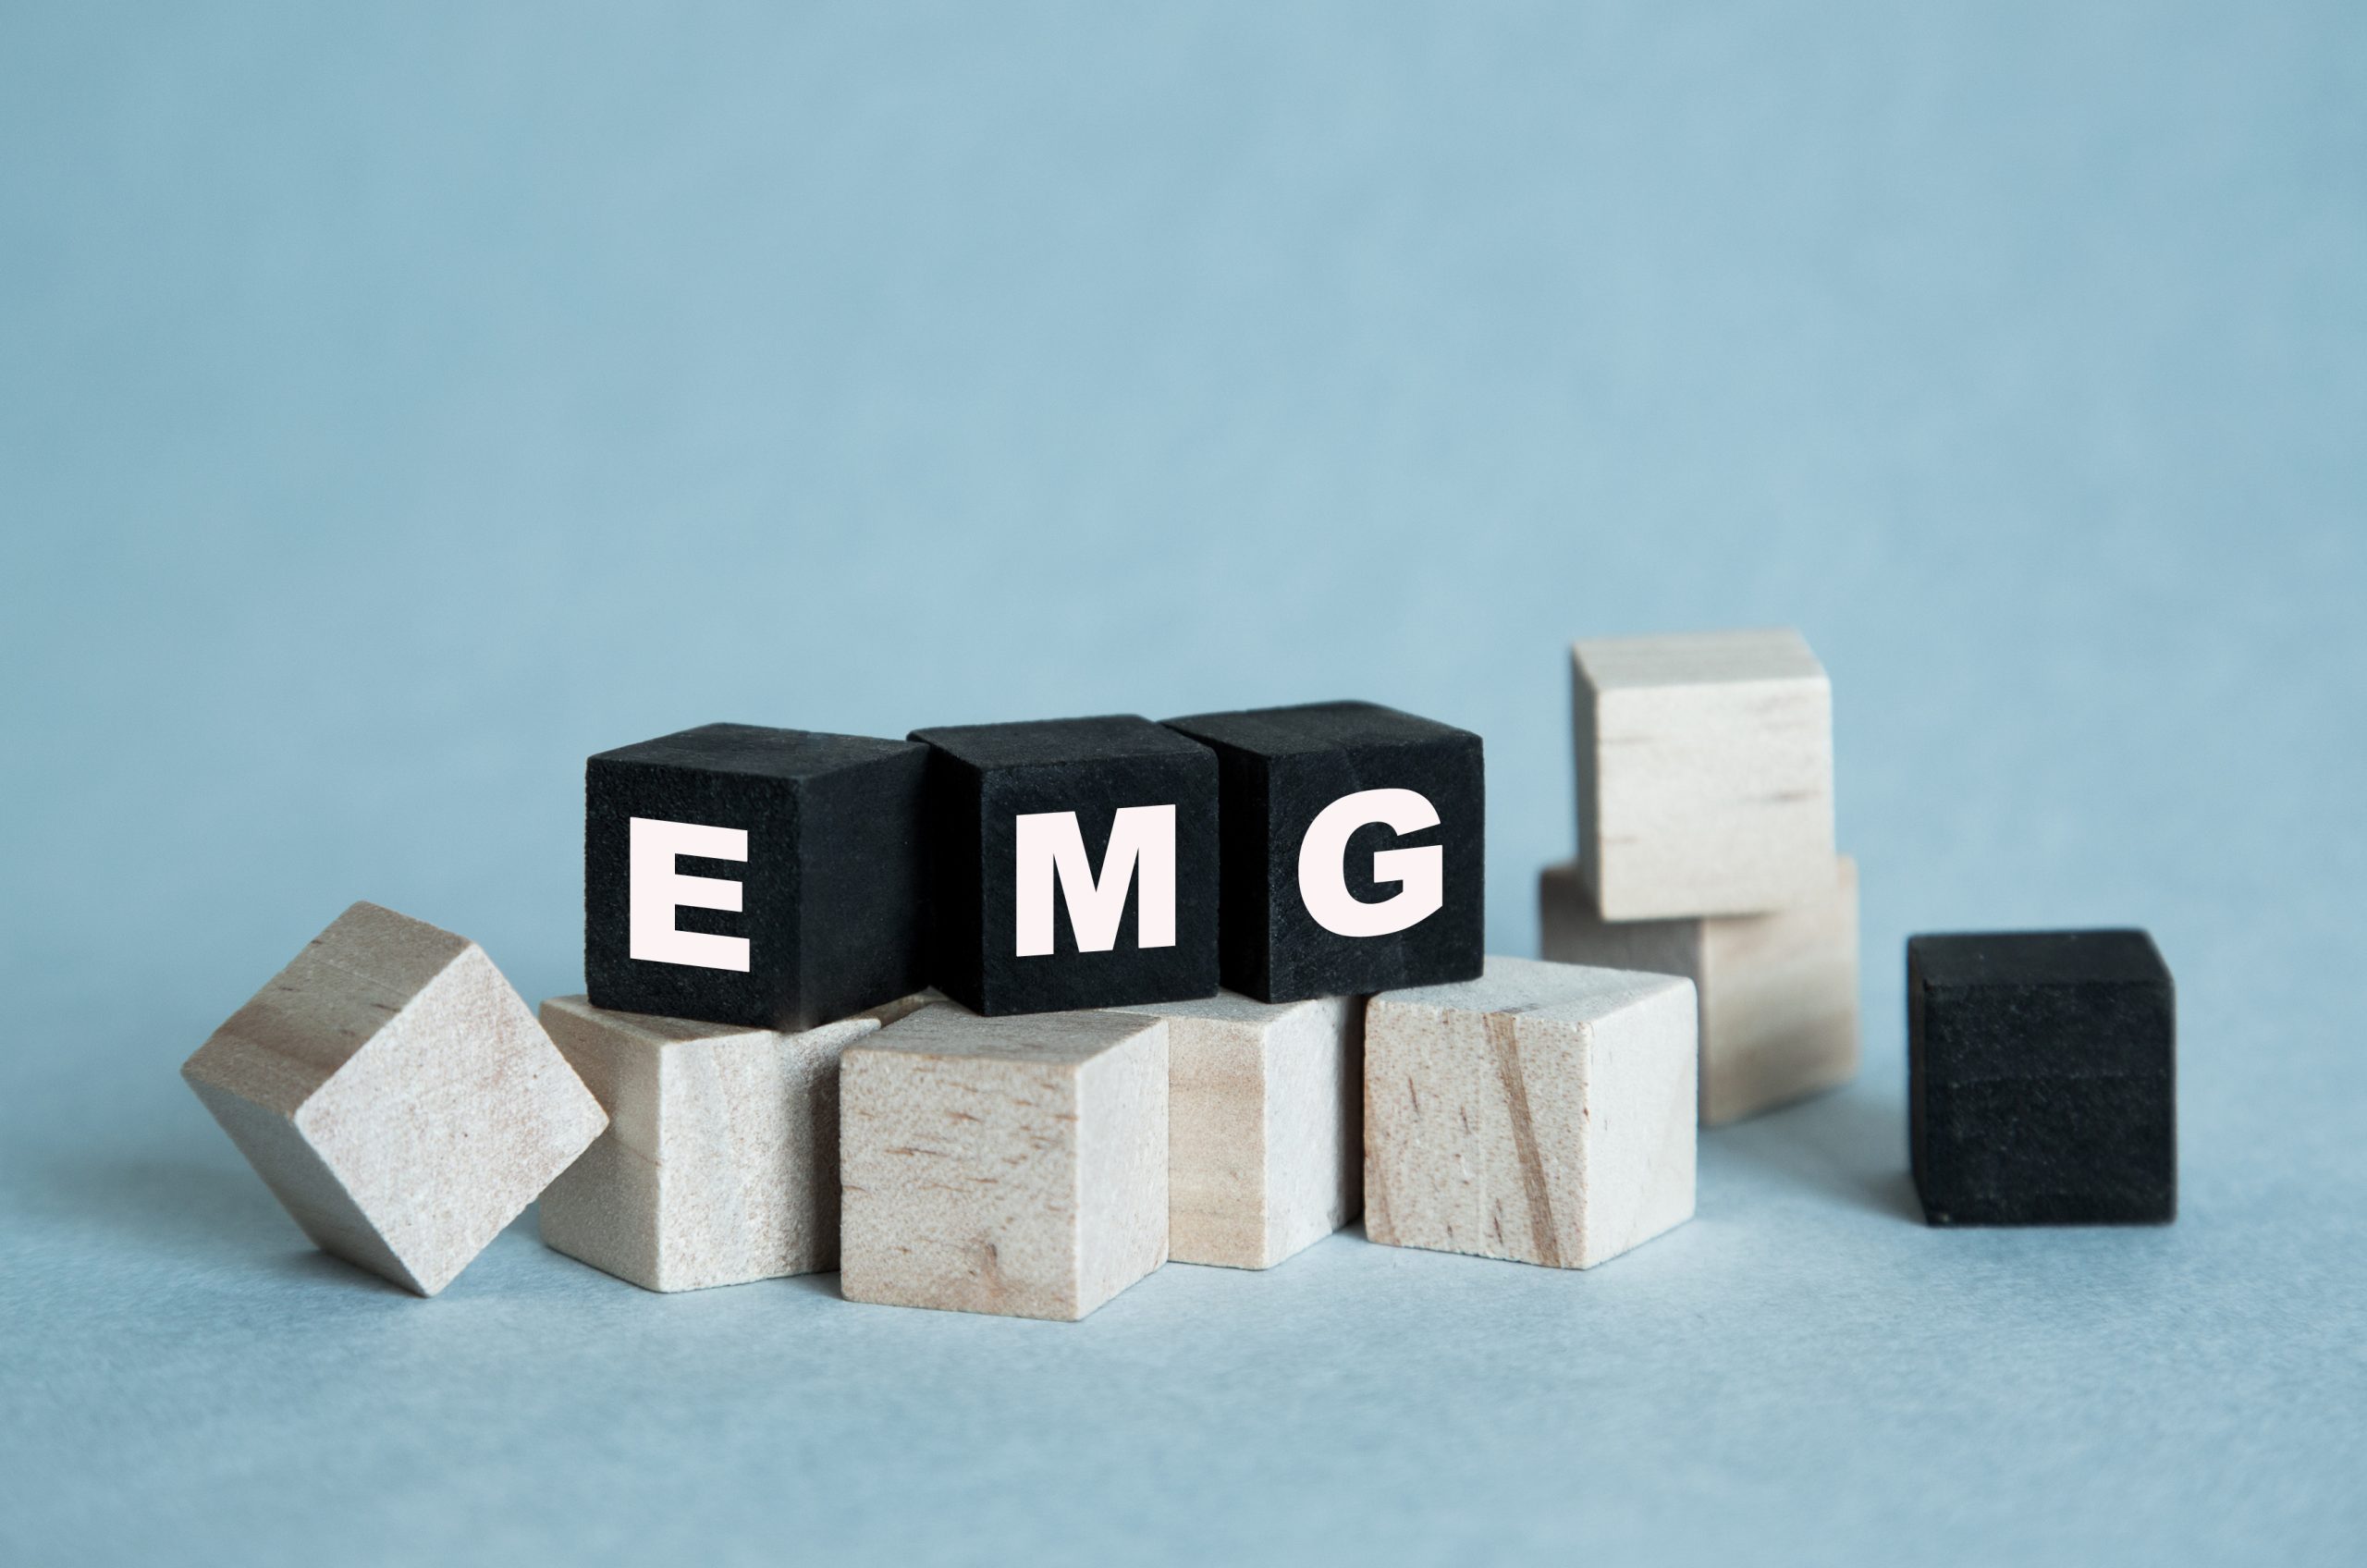 EMG Sensors: Everything You Need to Know